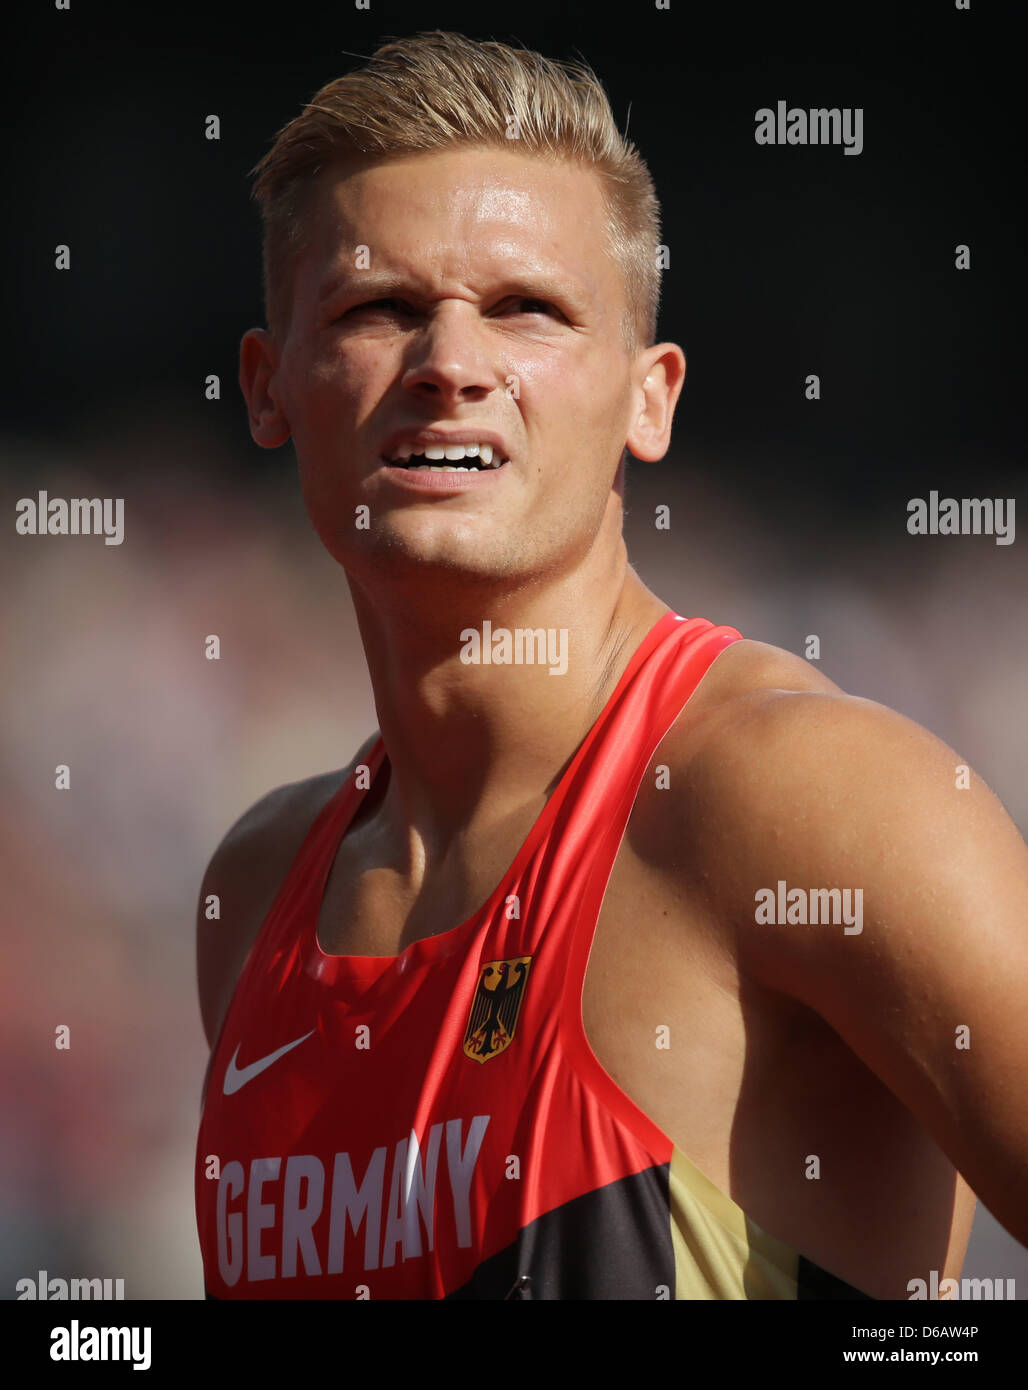 Pascal Behrenbruch of Germany reacts during the Men's Decathlon 110m  Hurdles in Olympic Stadium at the